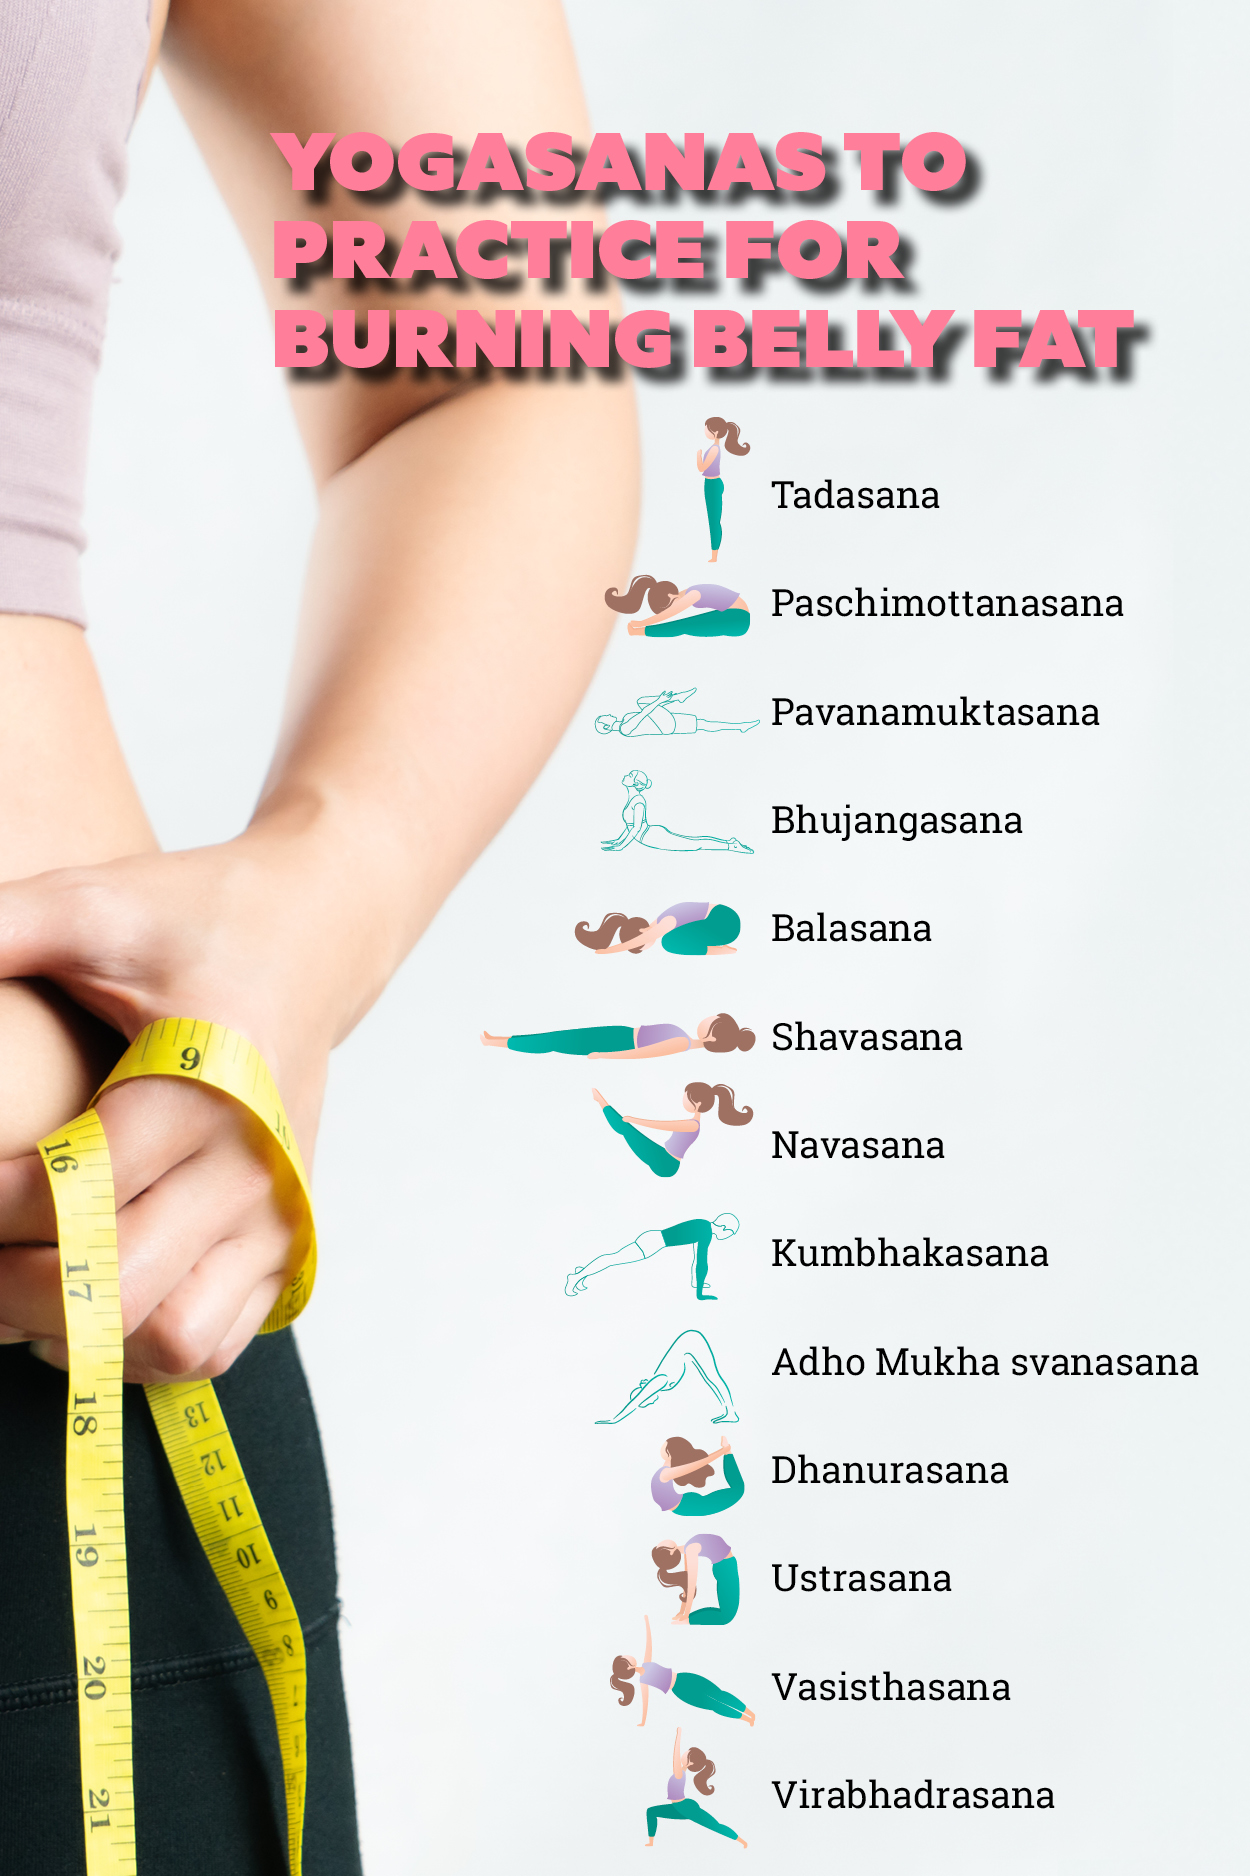 Exercises to Lose Belly Fat: An Inclusive Guide | by Ramjee Sah | Medium